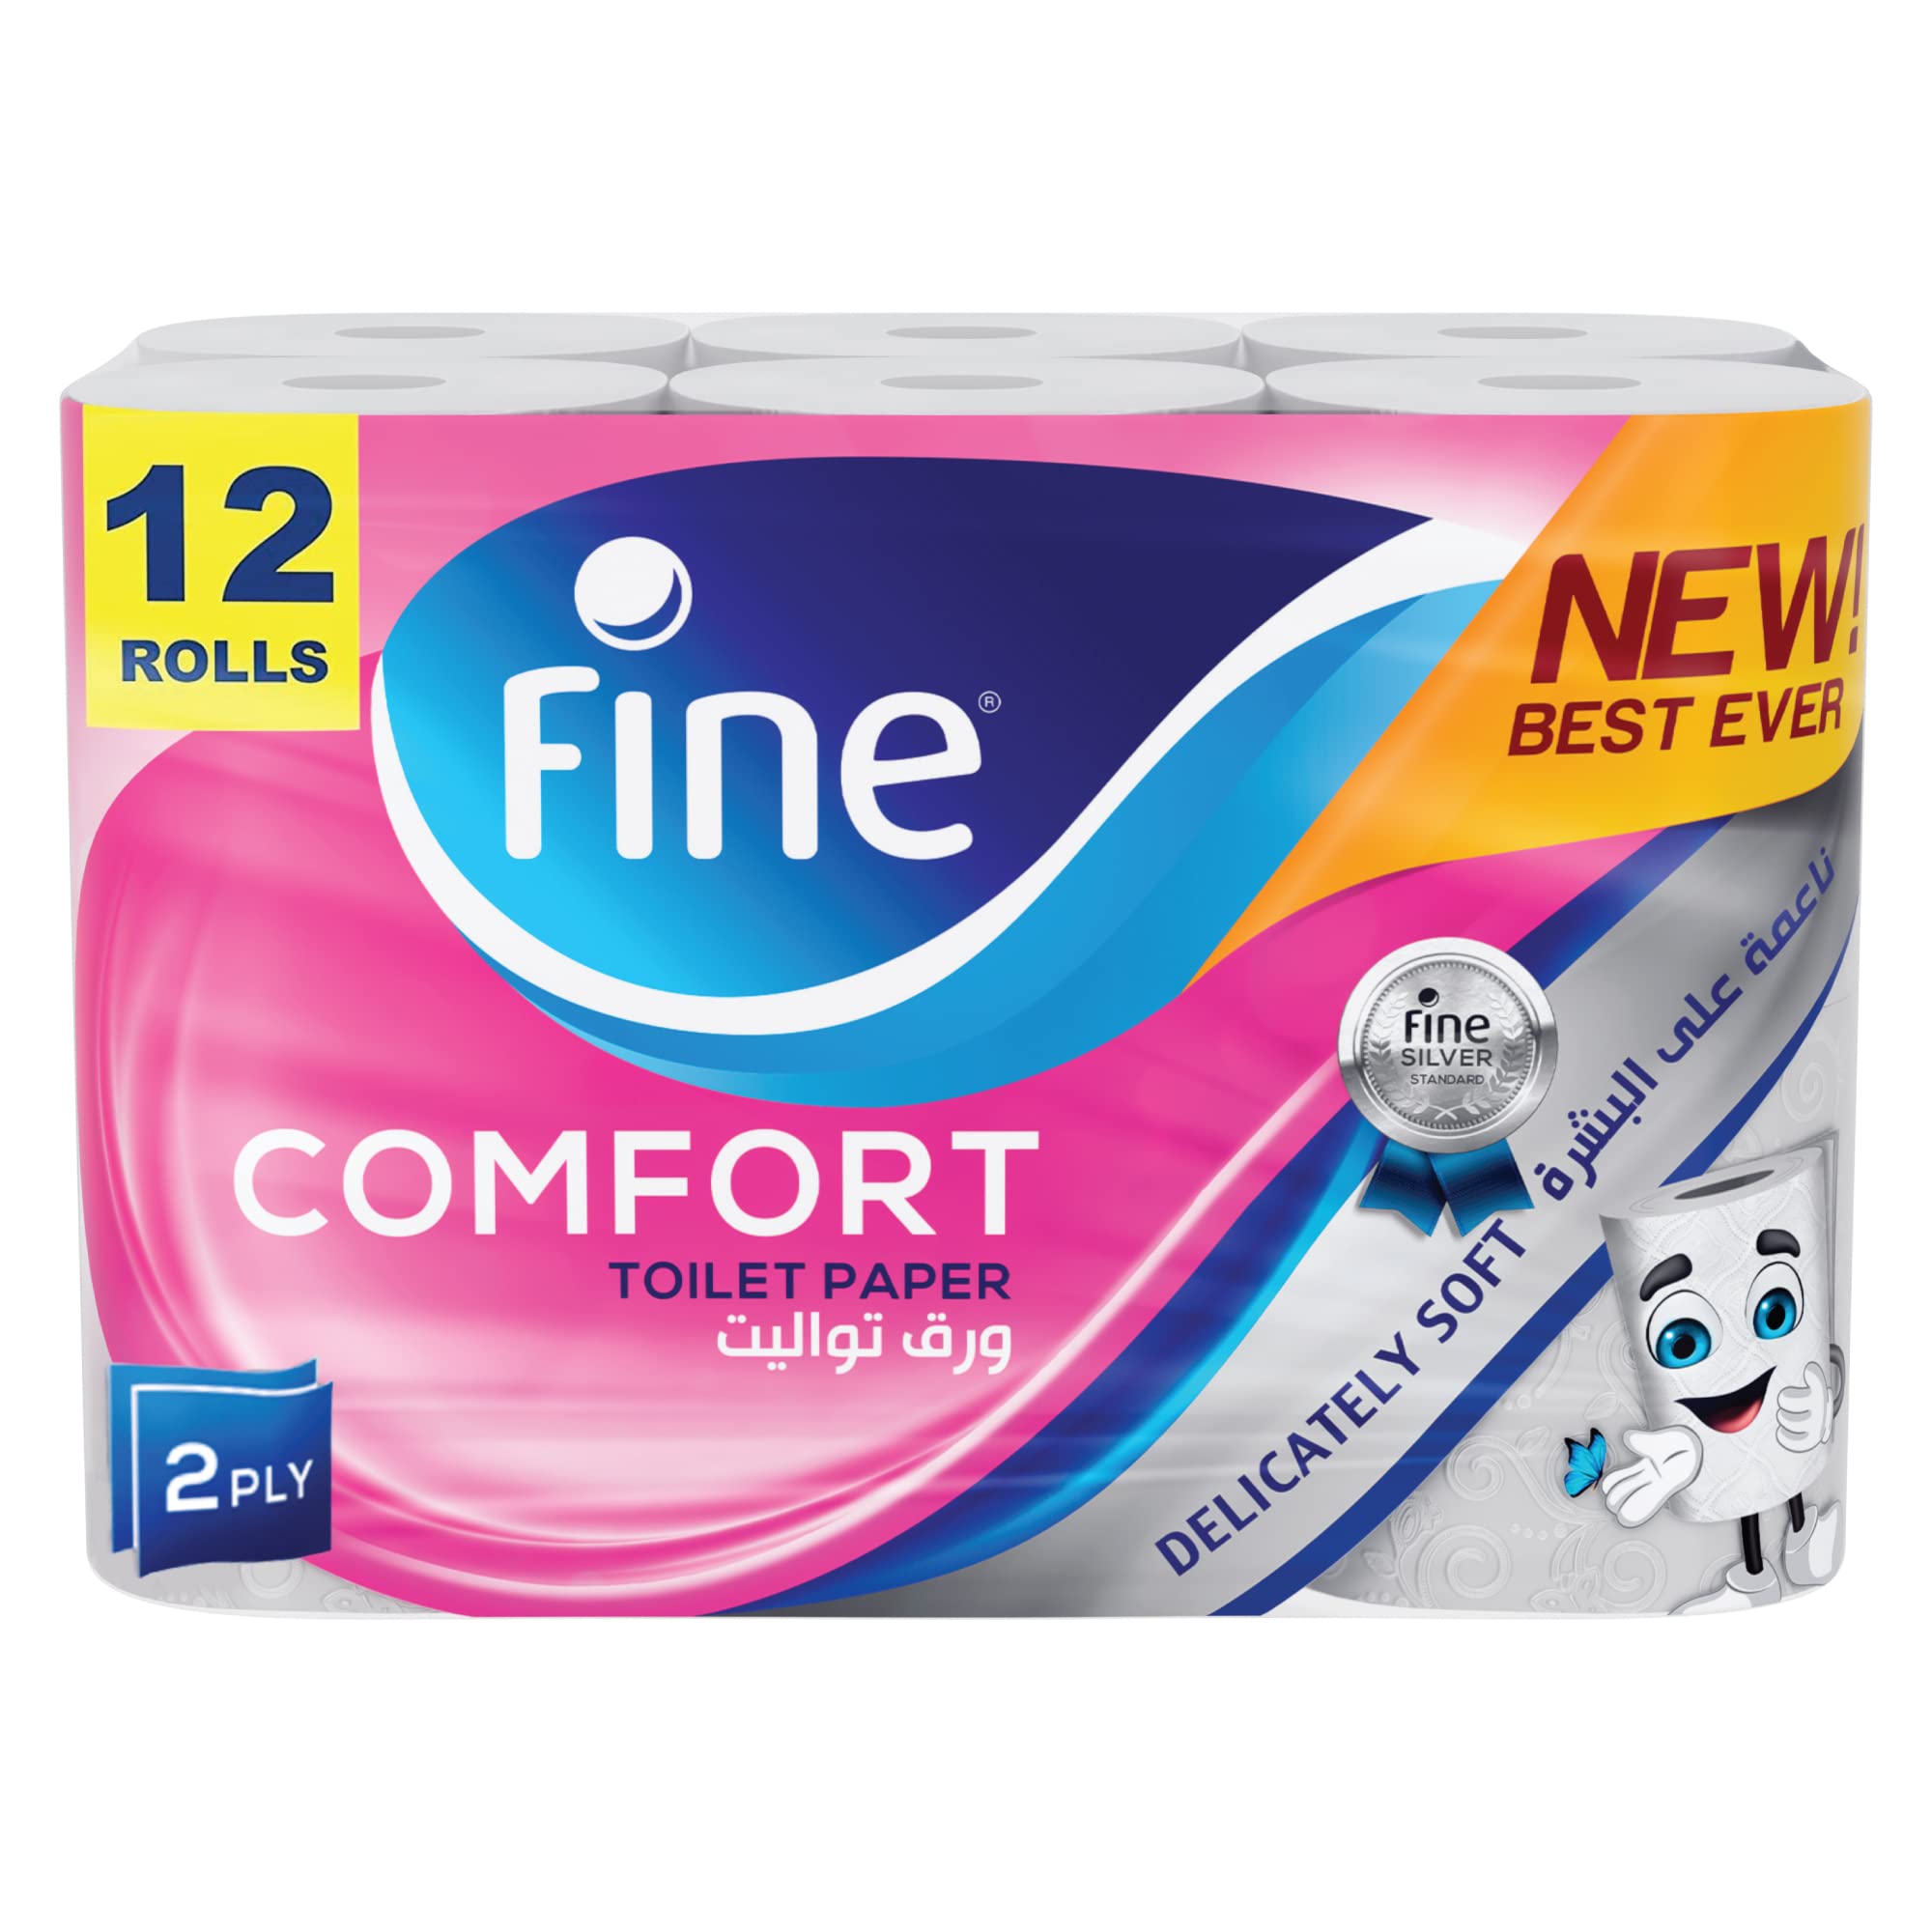 Fine Comfort, Absorbent, Sterilized, Soft, Flushable Toilet Paper, 2 Plies, Pack of 12 Rolls. New & Improved